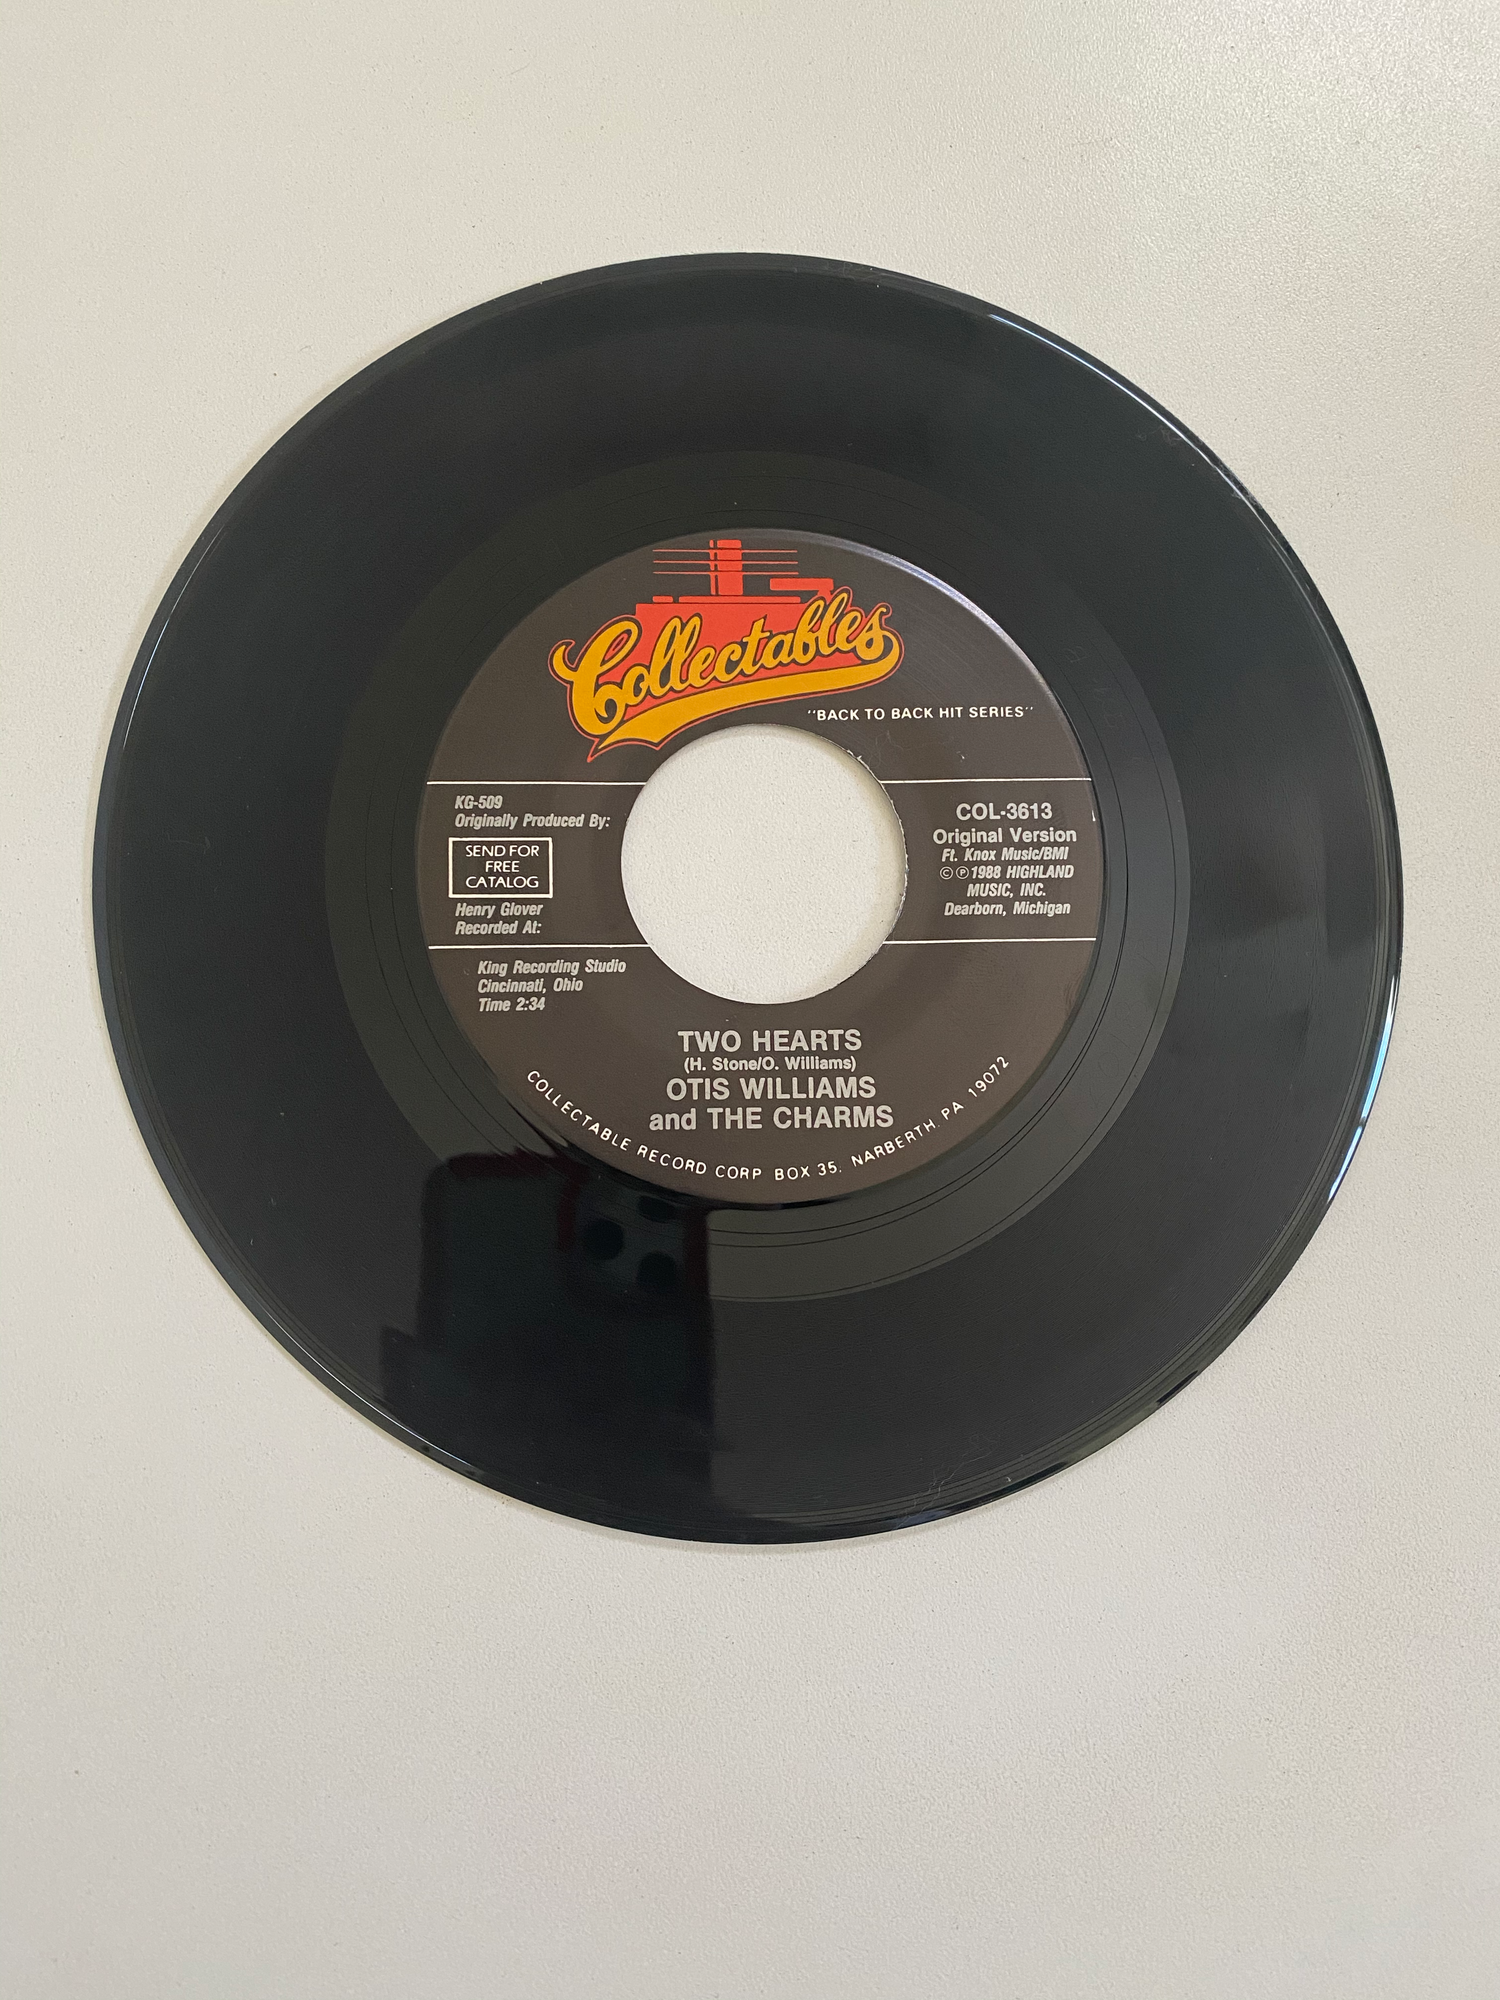 Otis Williams and The Charms - Ivory Tower | 45 The Vintedge Co.